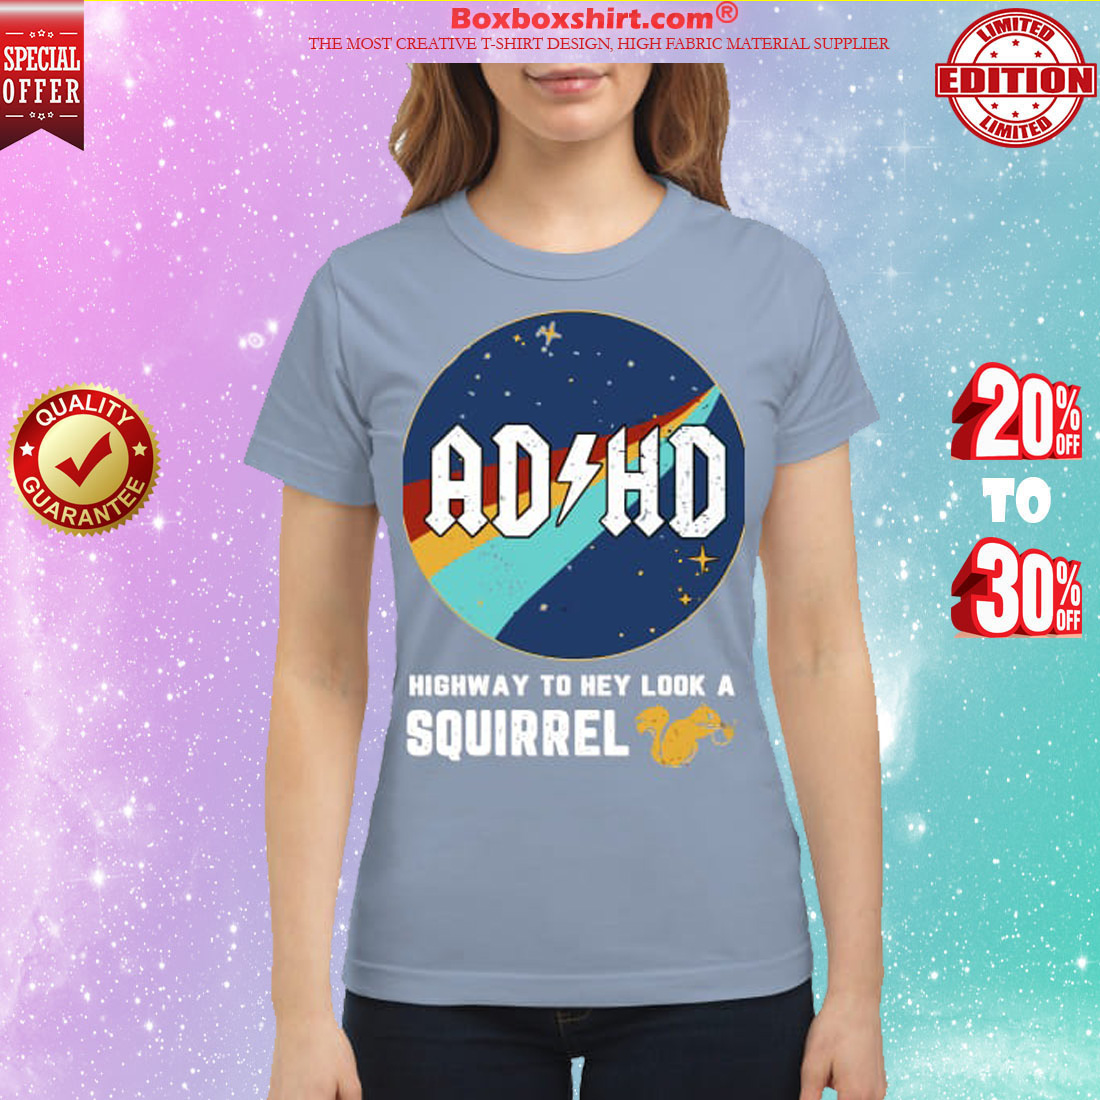 ADHD highway to hey look a squirrel classic shirt